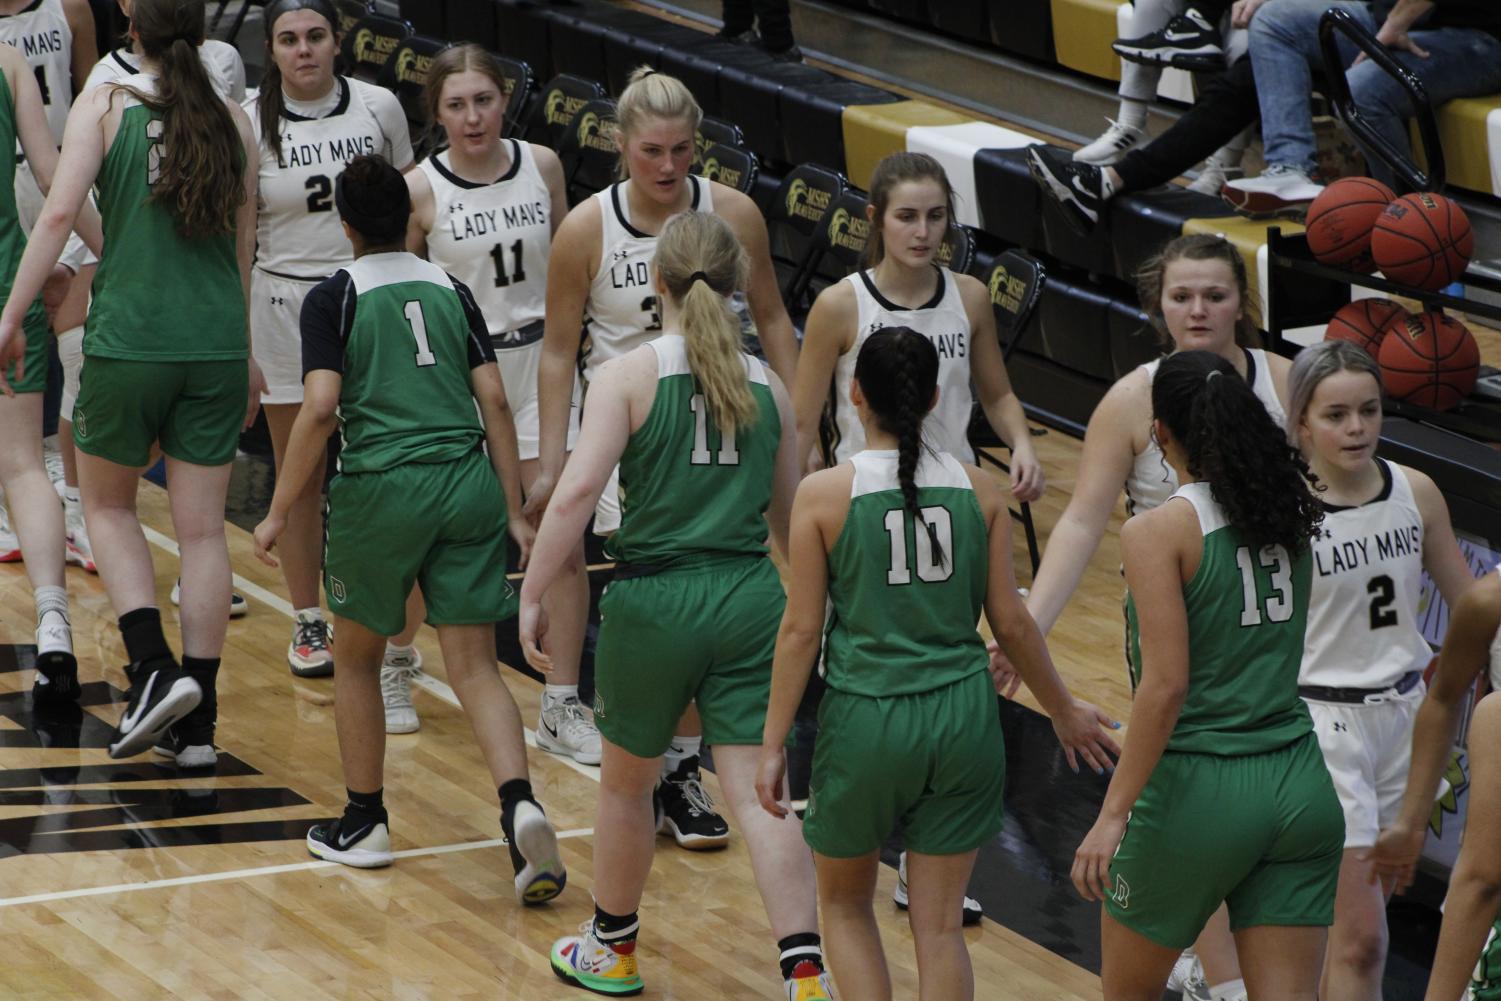 Girls+and+boys+basketball+game+against+Maize+South+1%2F7+%28photos+by+Jewel+Hardin%29